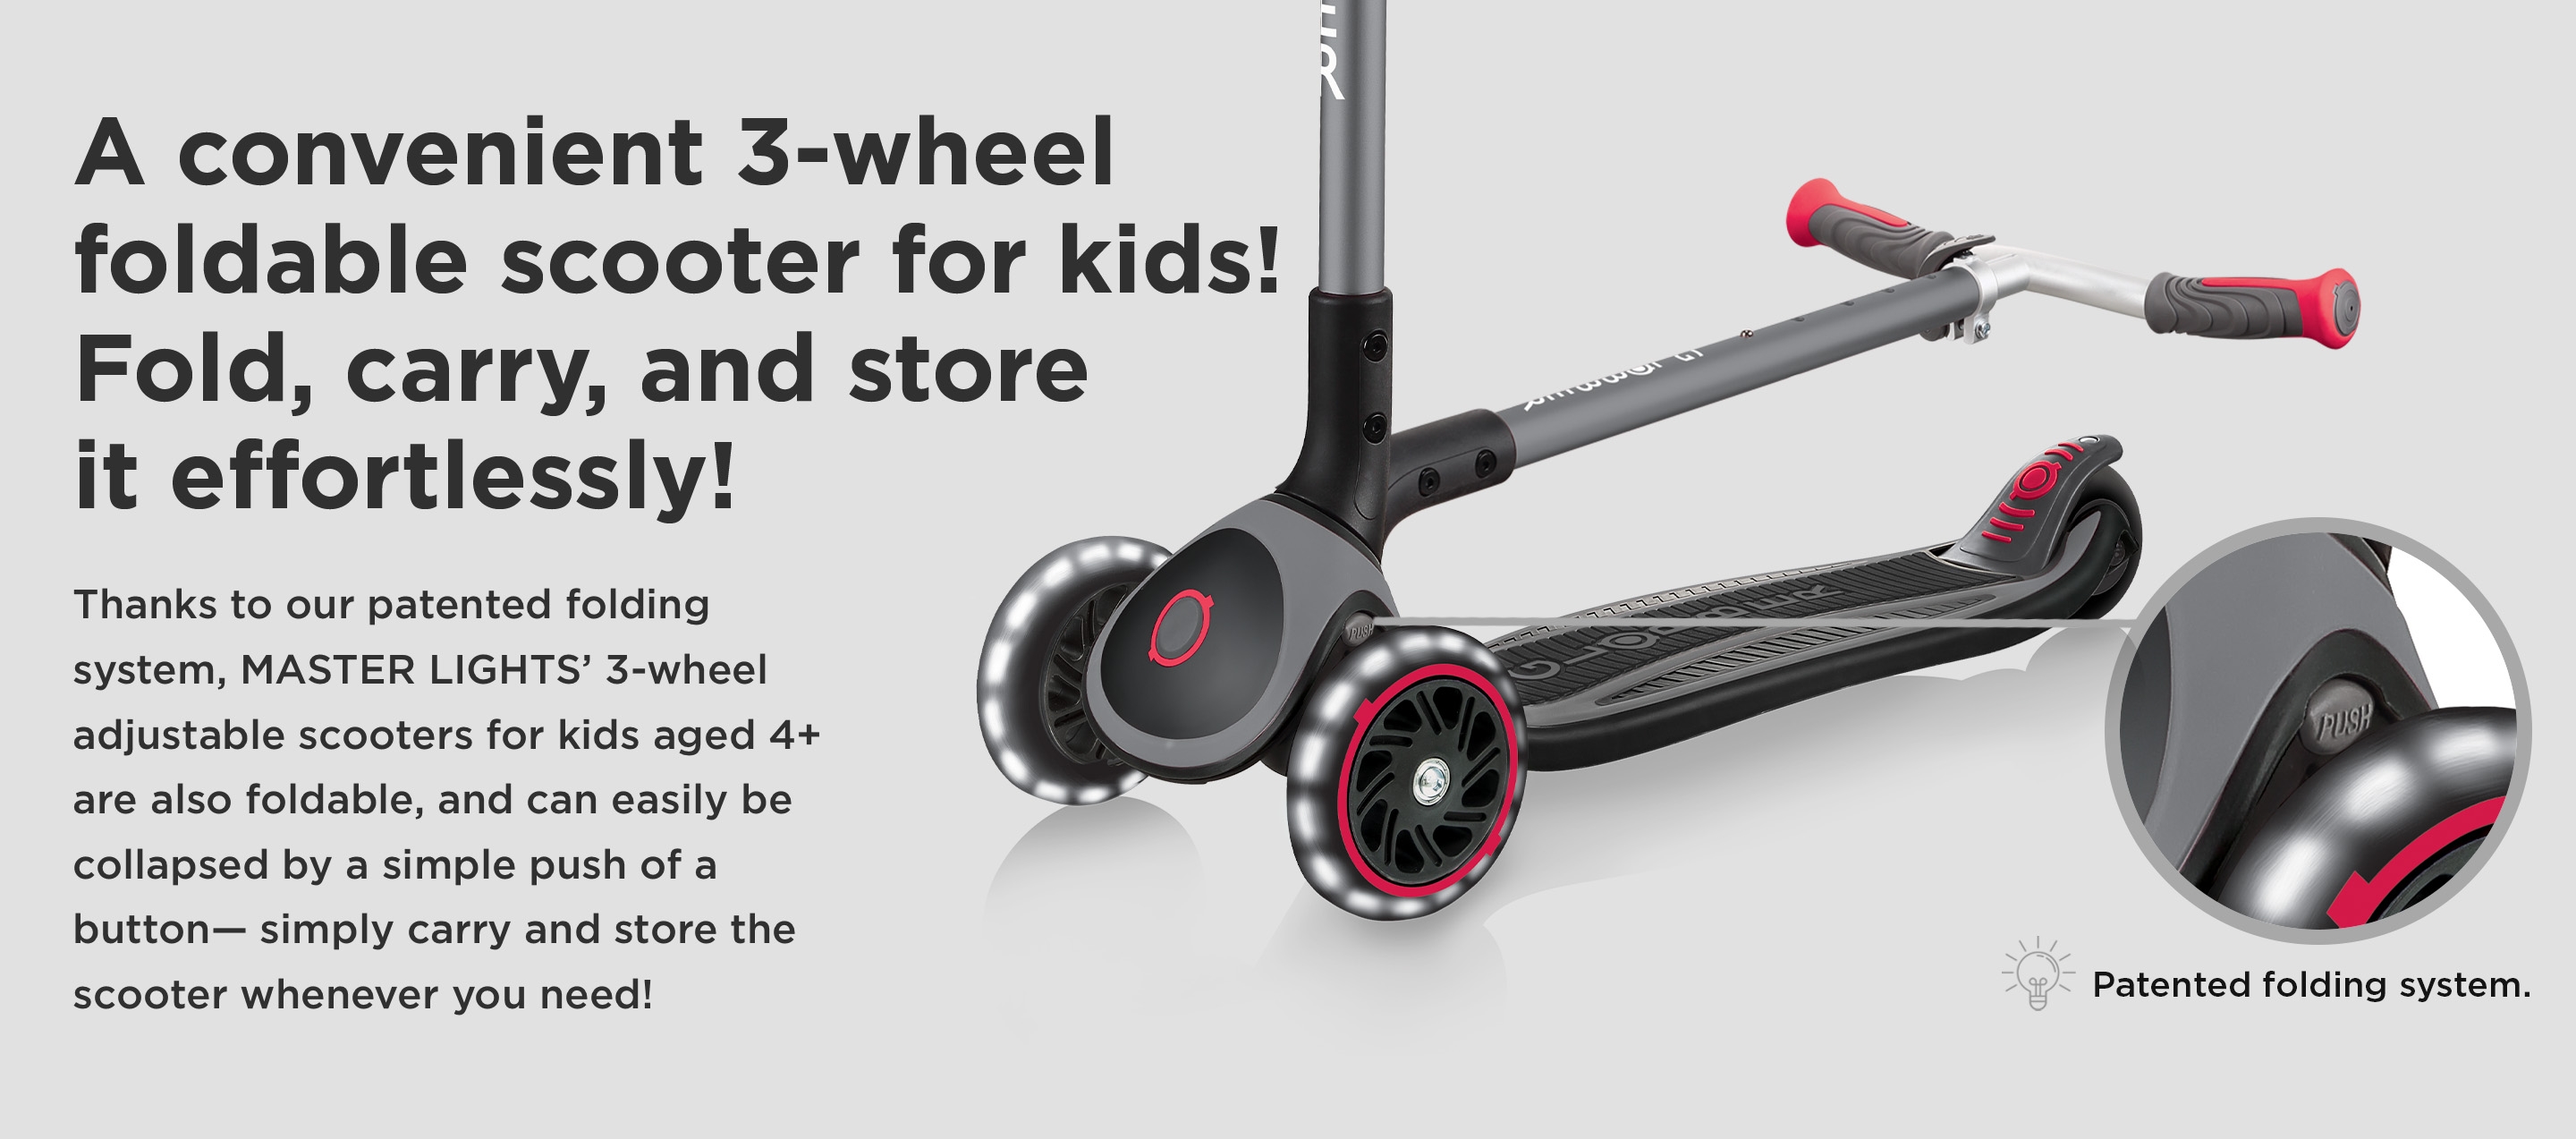 A convenient 3-wheel foldable scooter for kids! Fold, carry, and store it effortlessly! Thanks to our patented folding system, MASTER LIGHTS’ 3-wheel adjustable scooters for kids aged 4+ are also foldable, and can easily be collapsed by a simple push of a button— simply carry and store the scooter whenever you need! 